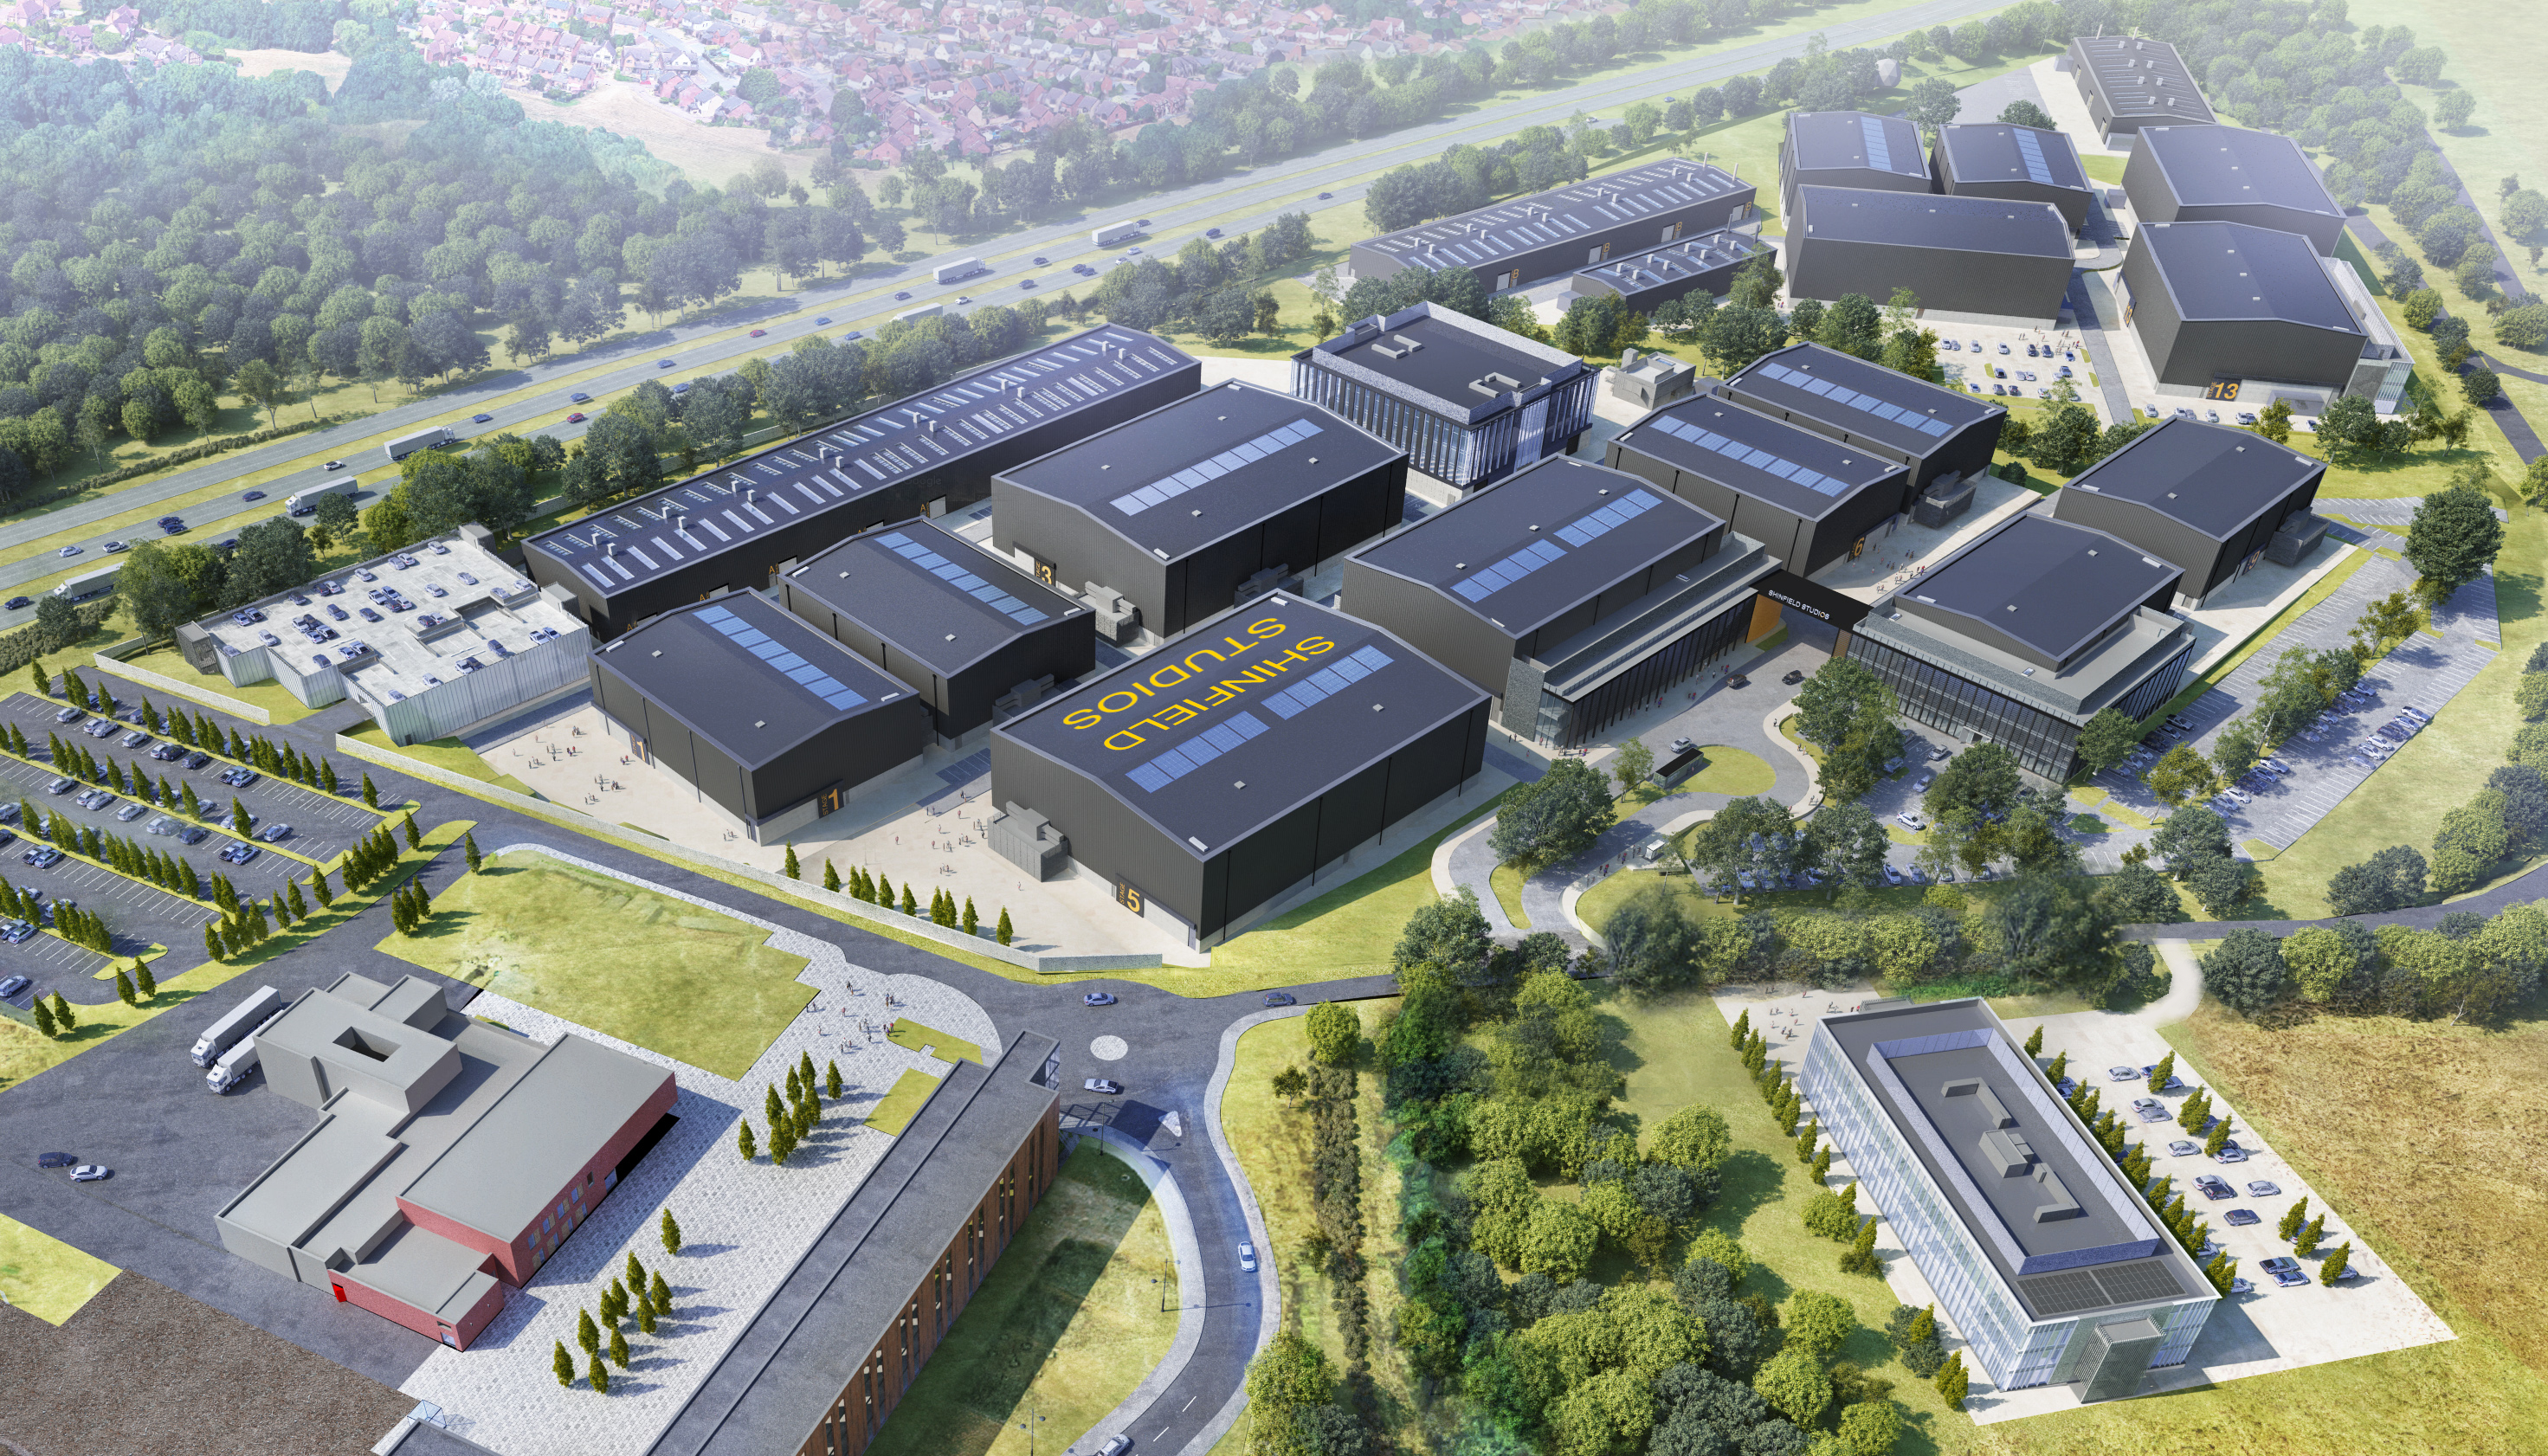 The development of a world class production hub for the UK’s film and television industry